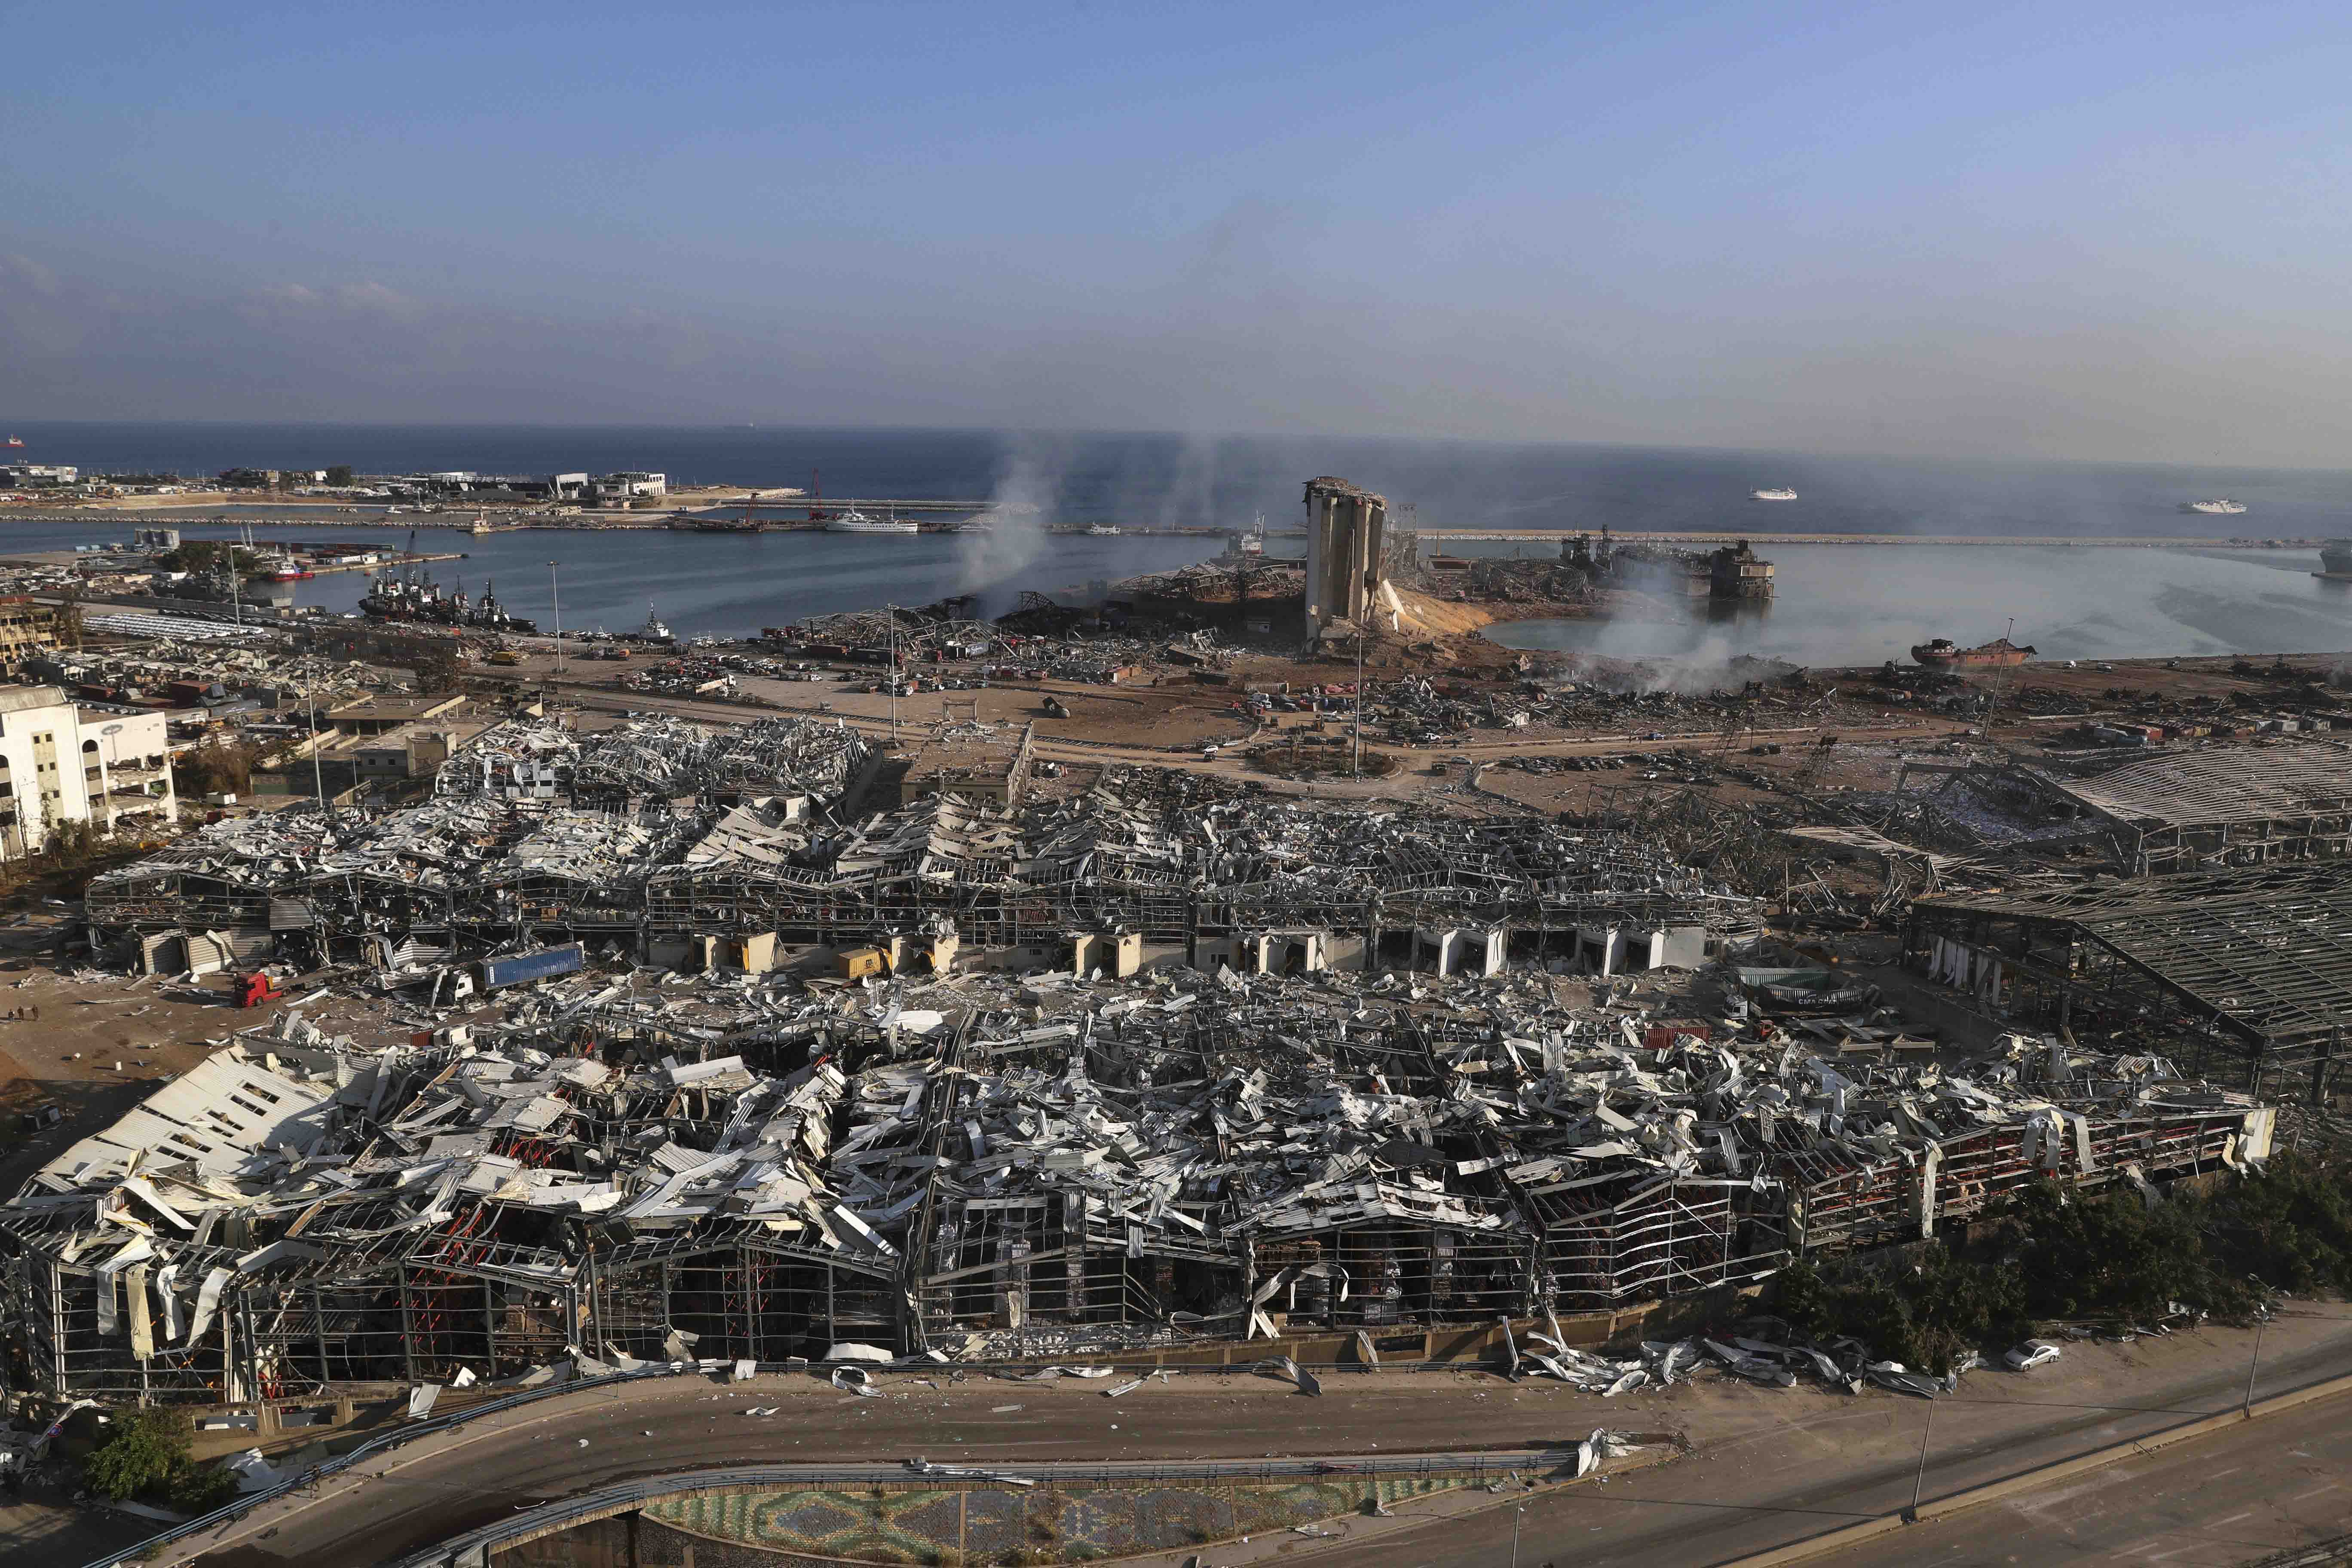 Aftermath of the explosions at Beirut's seaport, August 5, 2020.